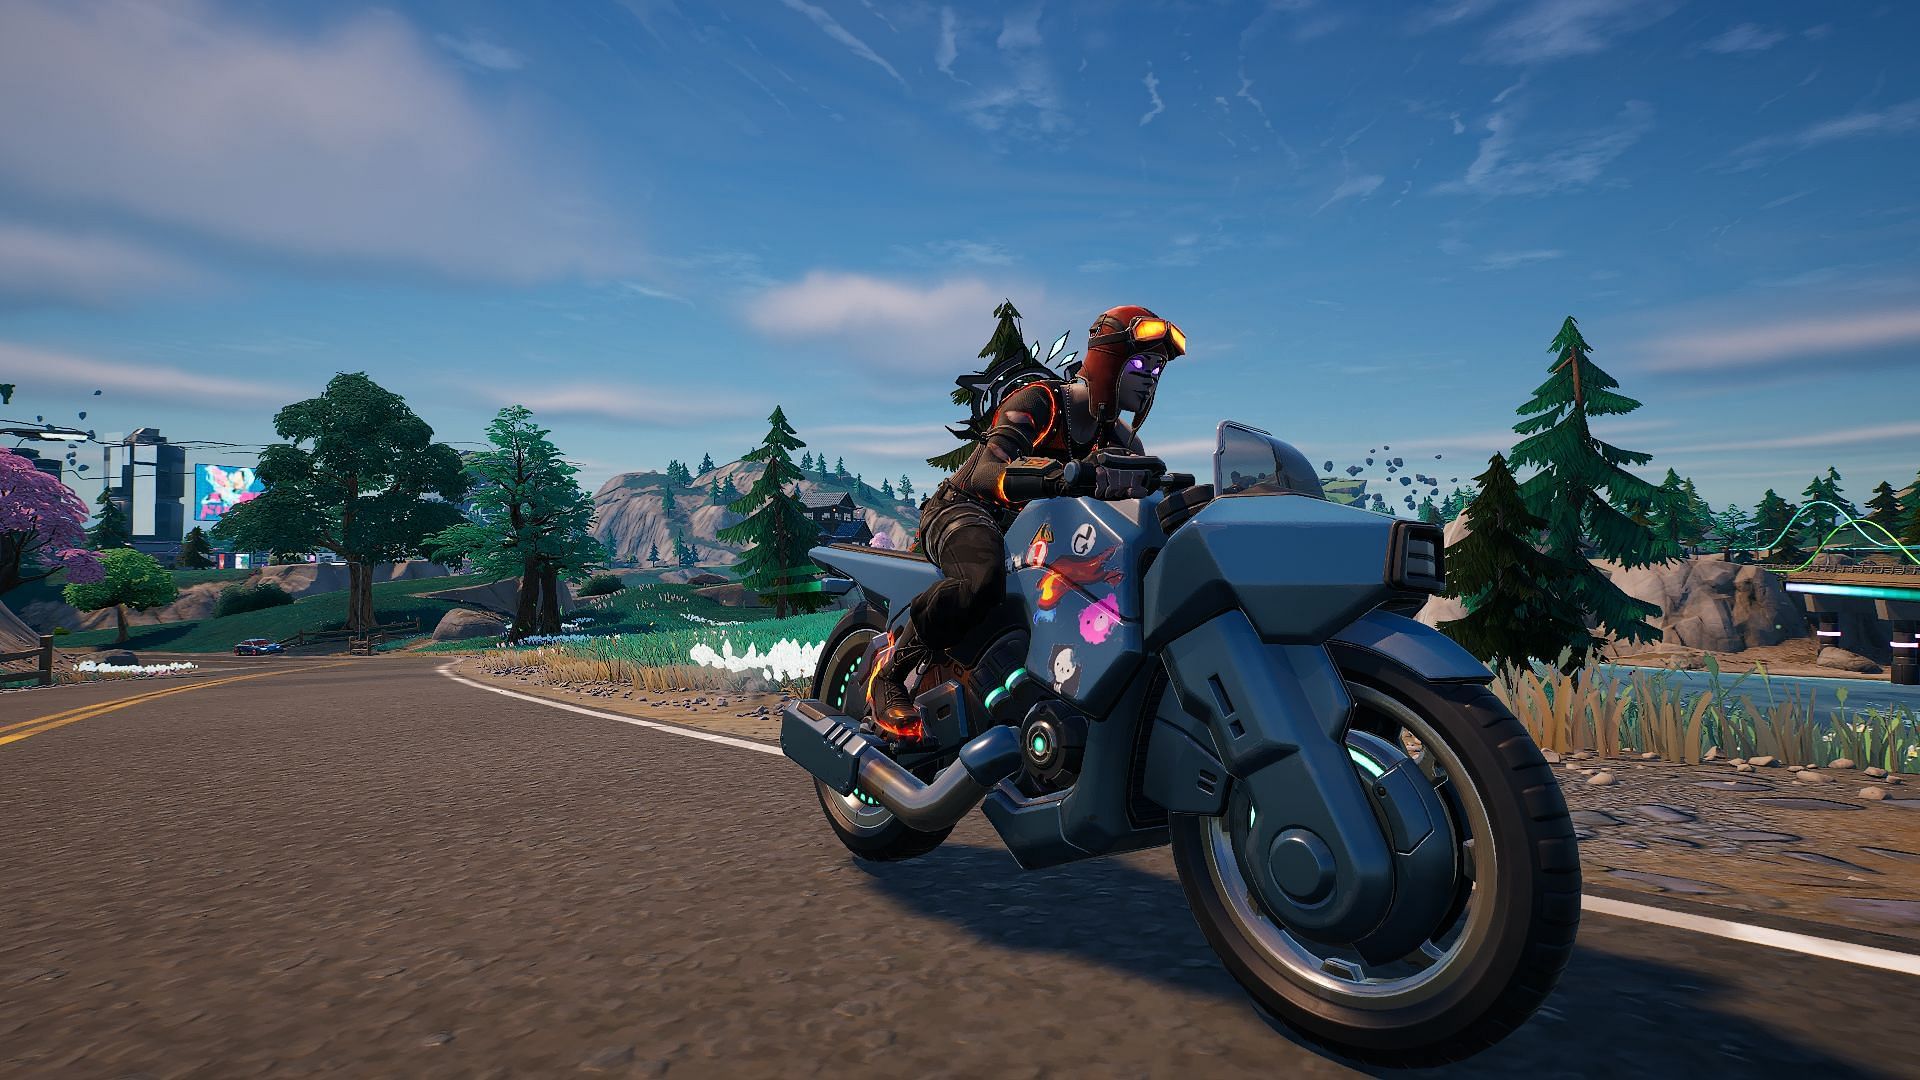 Rogue Bikes look stunning in-game (Image via Epic Games/Fortnite)